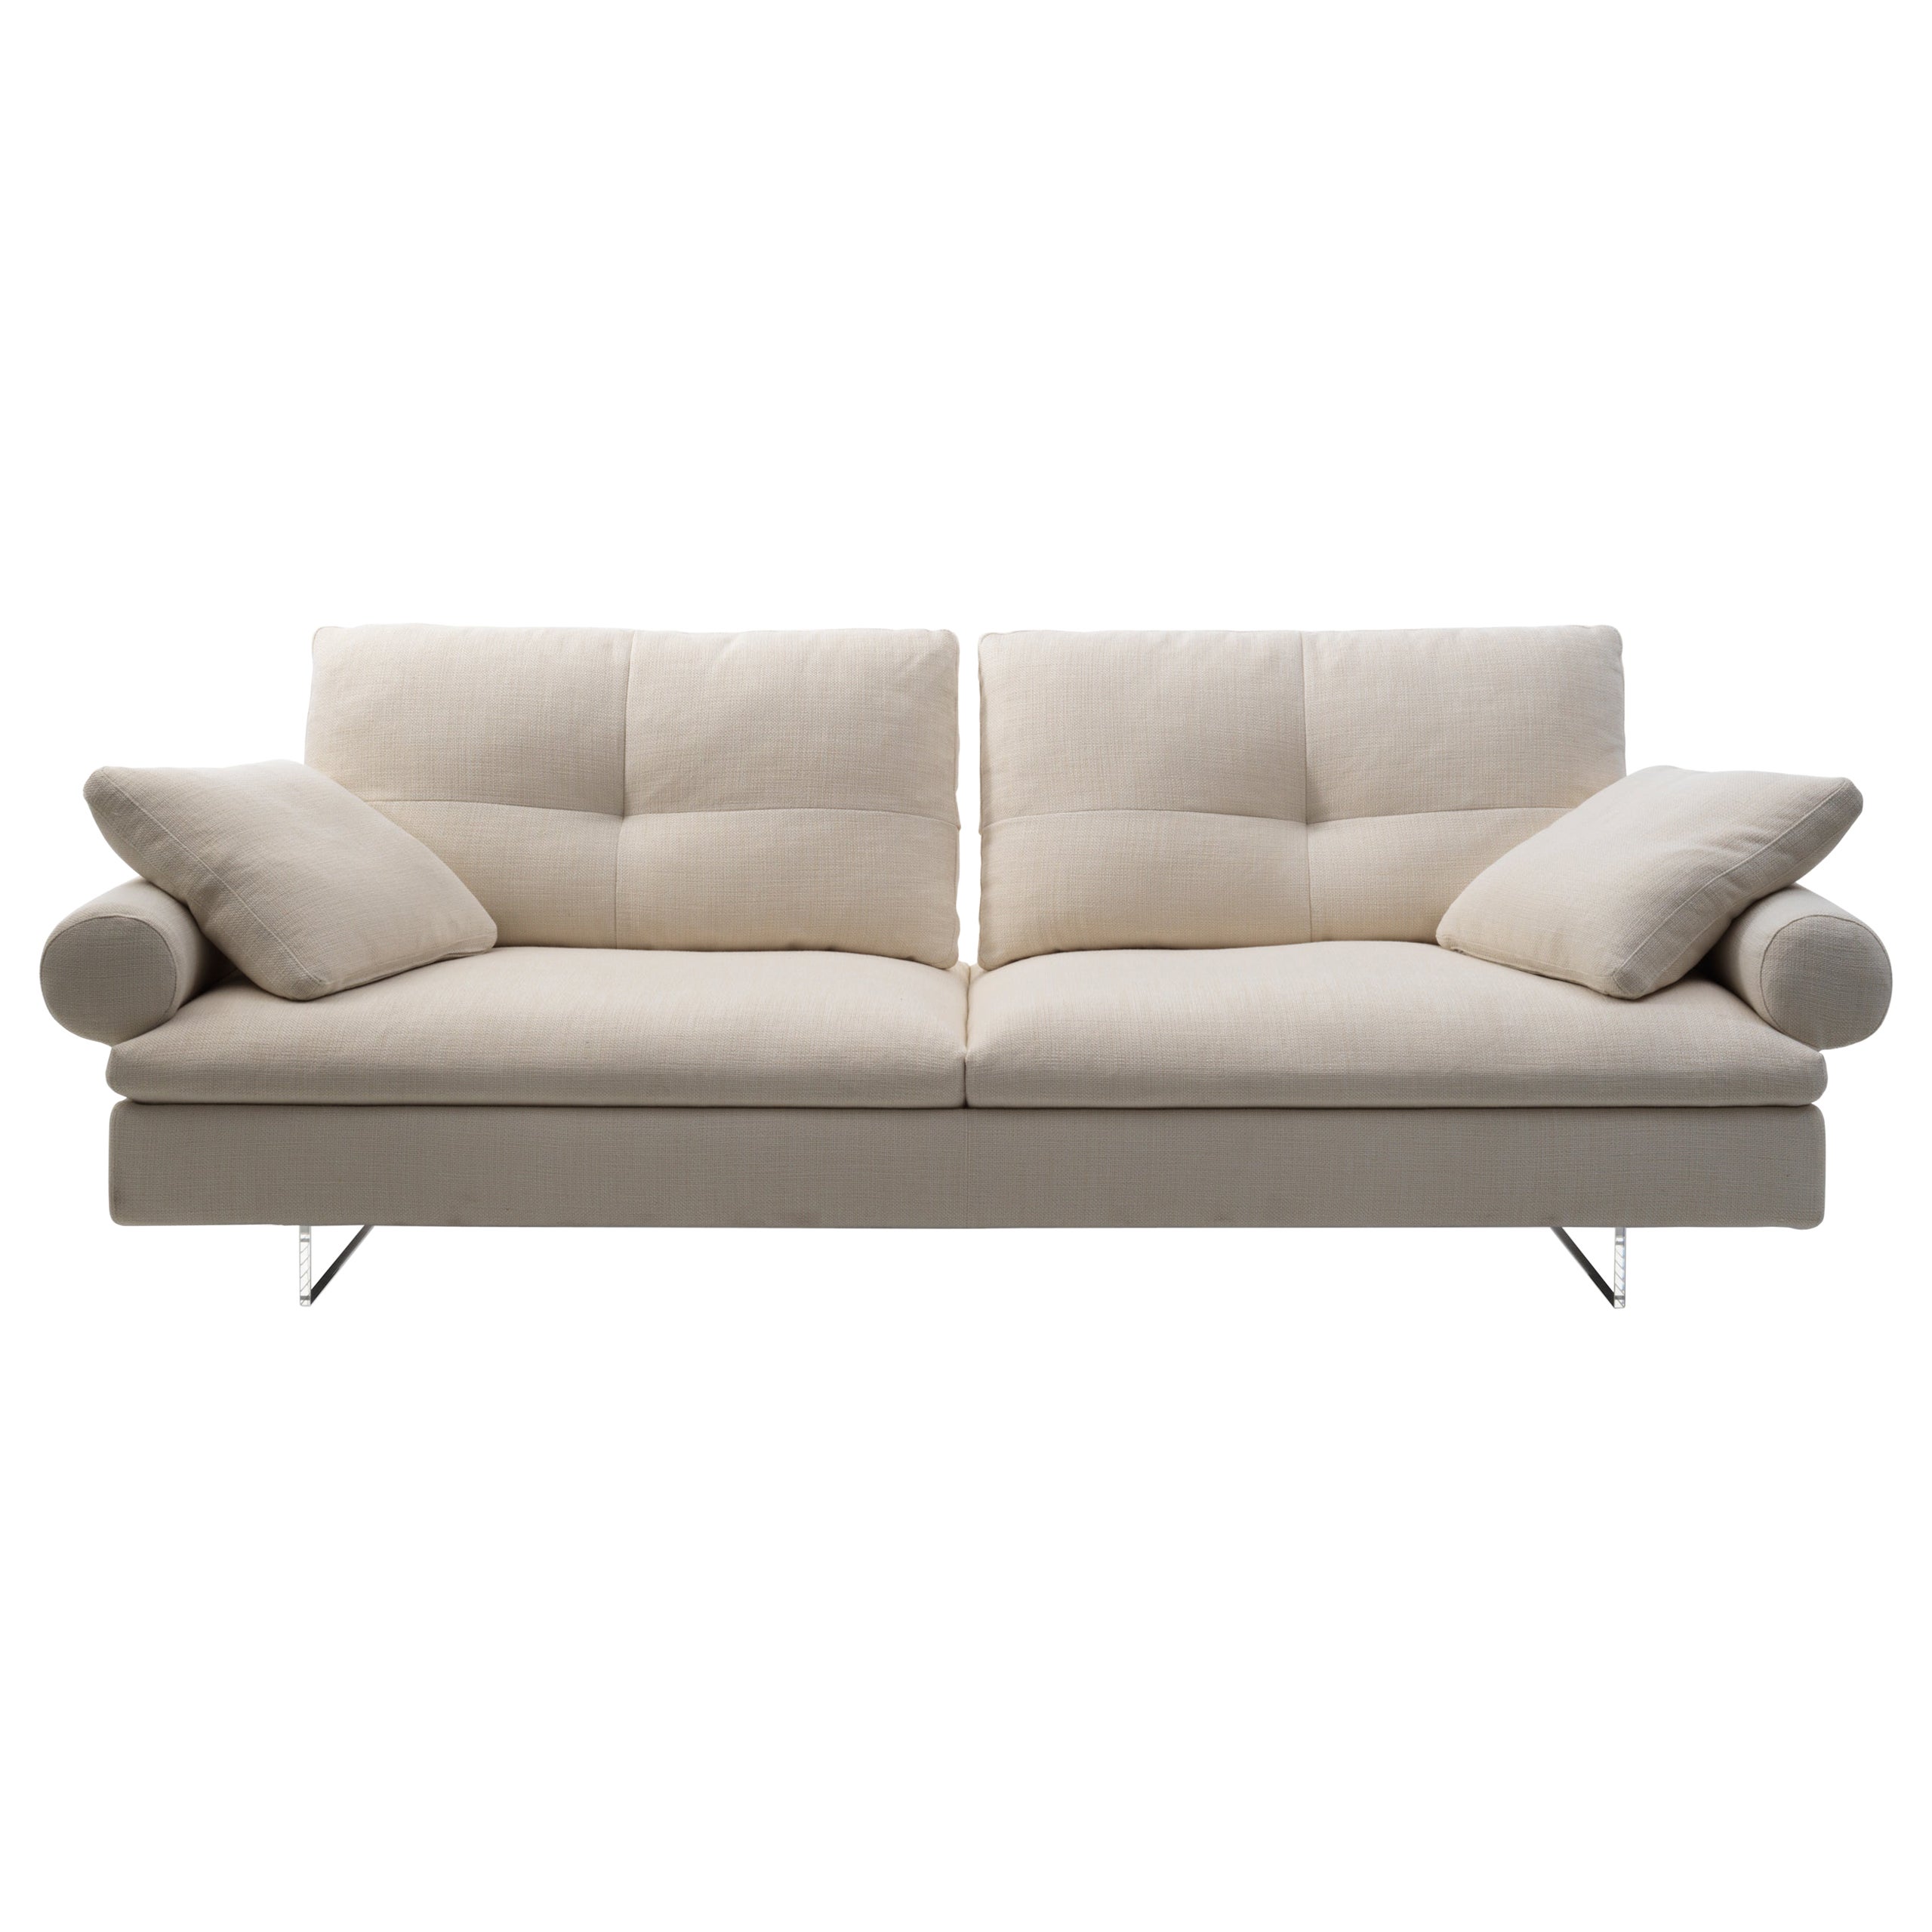 Limes New 80 Medium Sofa in Beige Upholstery with Roll Armrest by Sergio Bicego For Sale